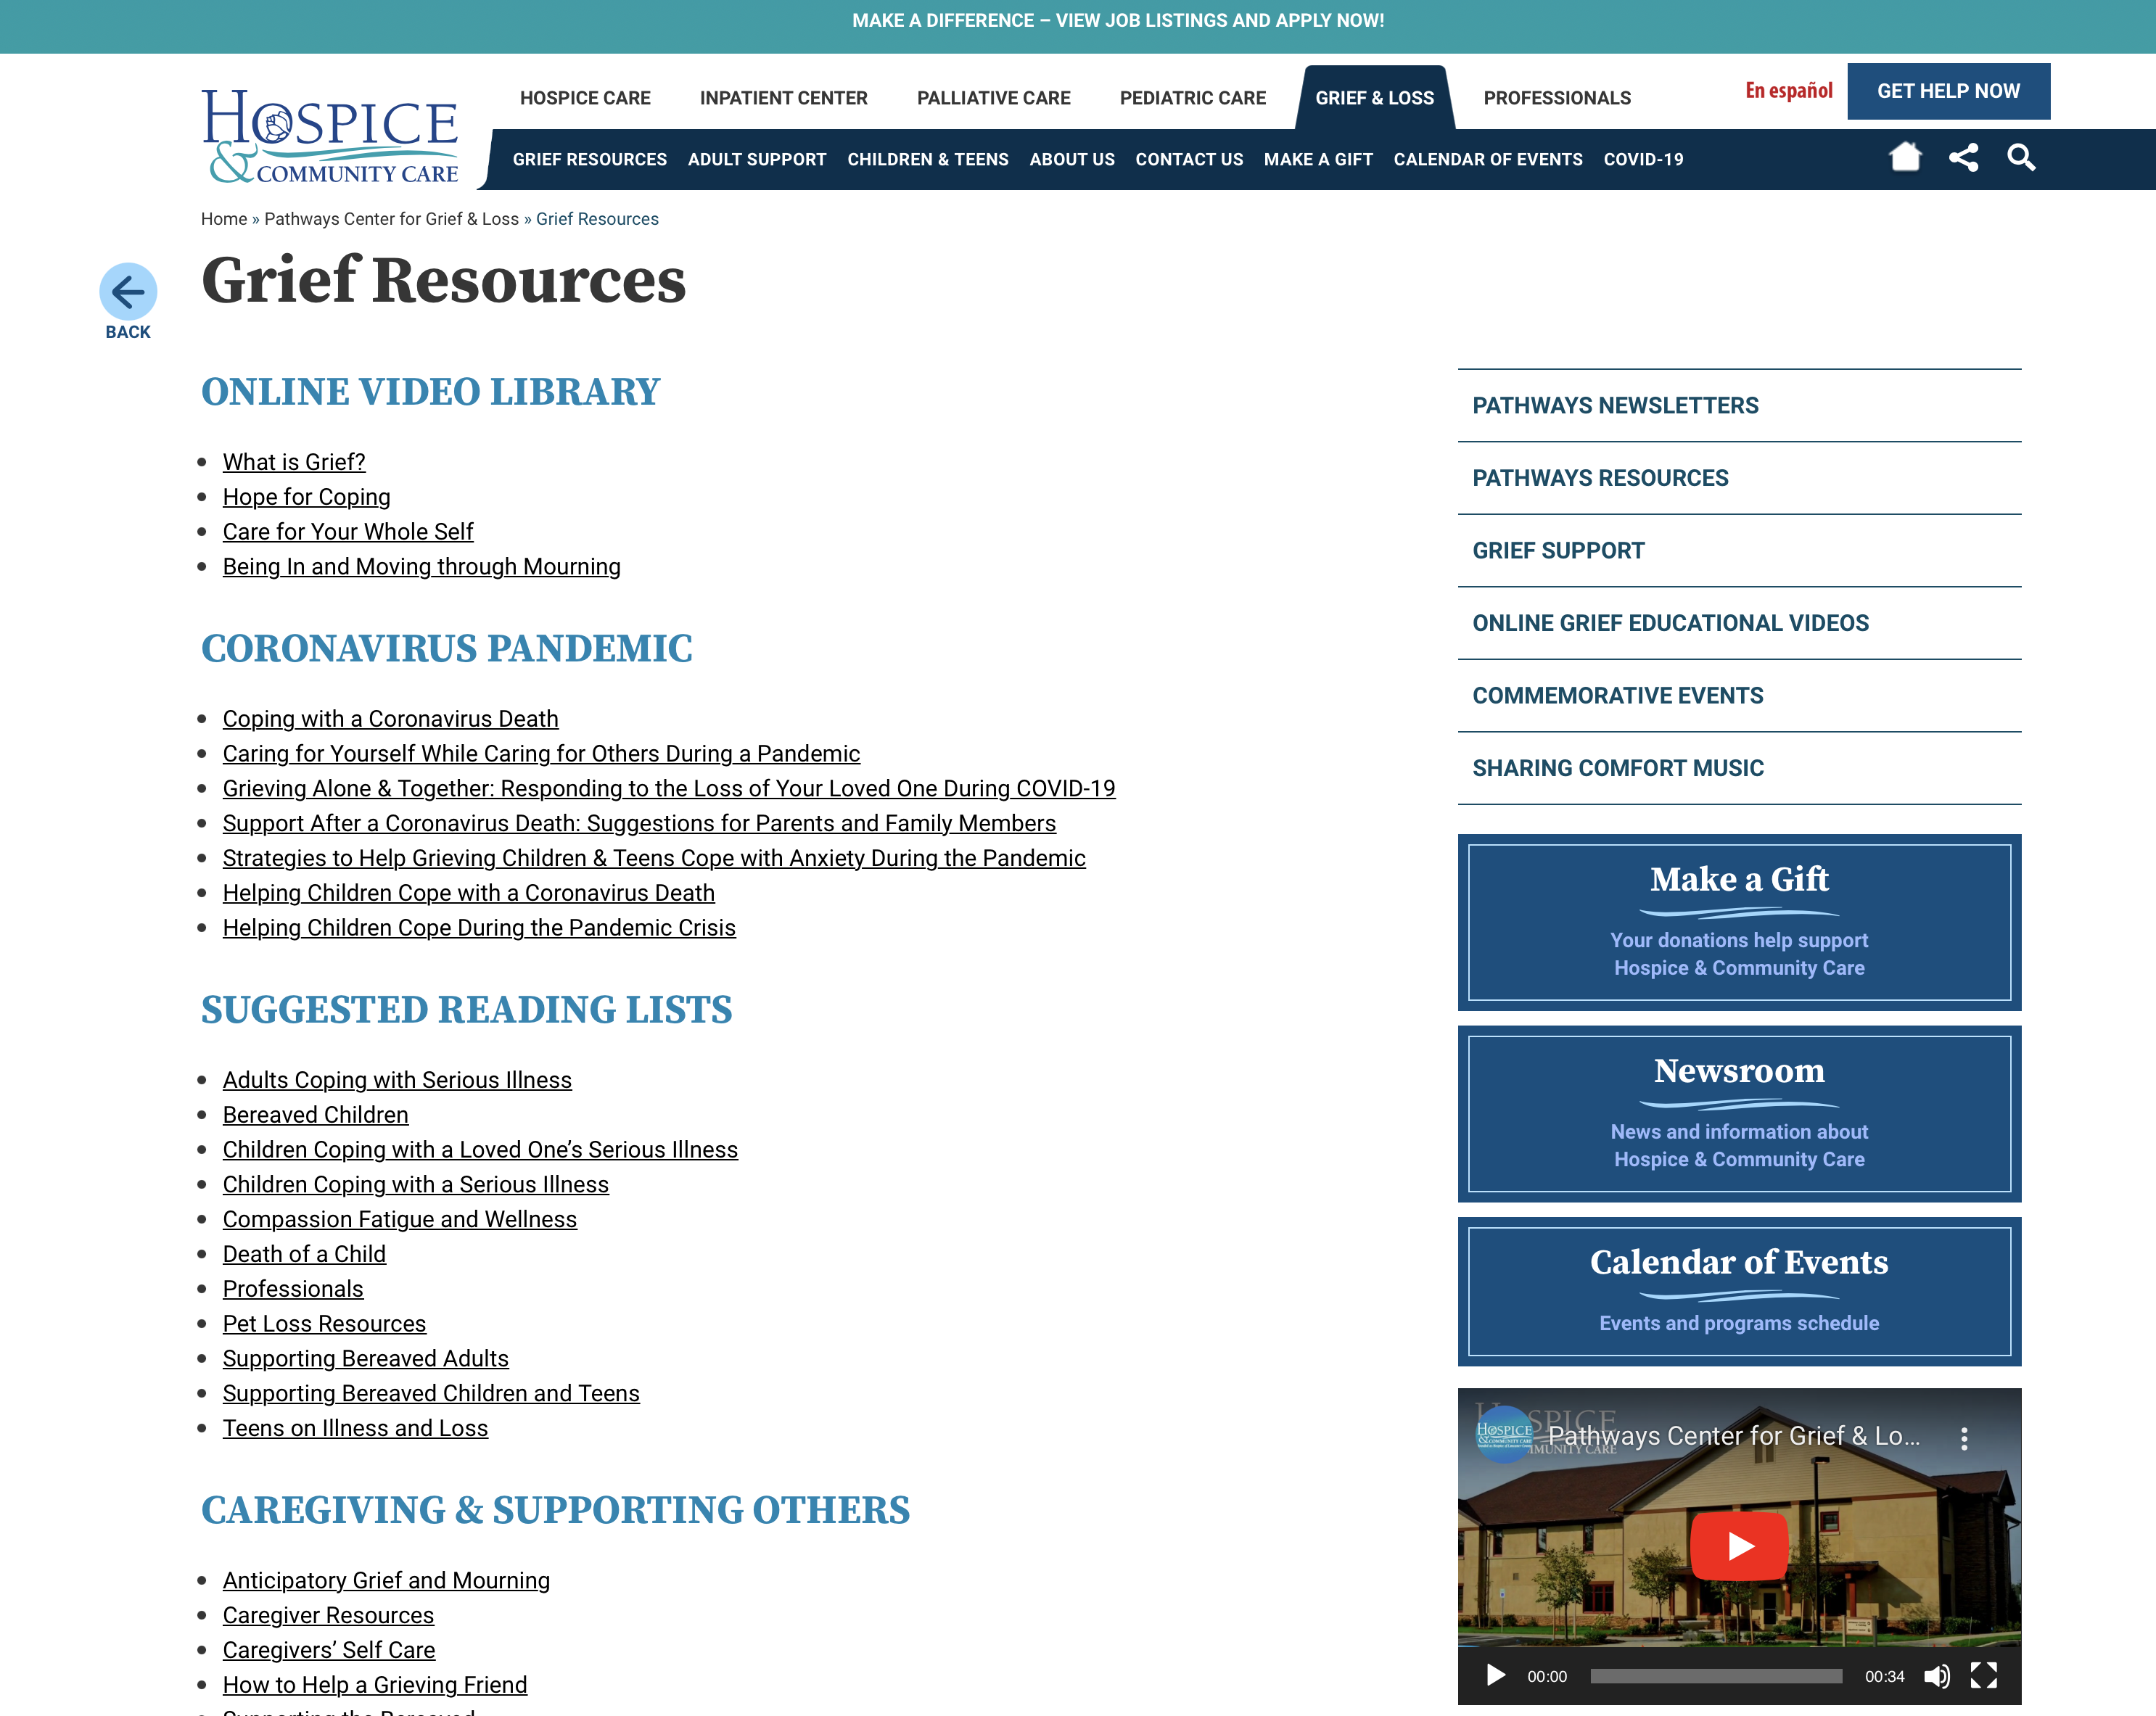 Grief Resources Page Featured Image